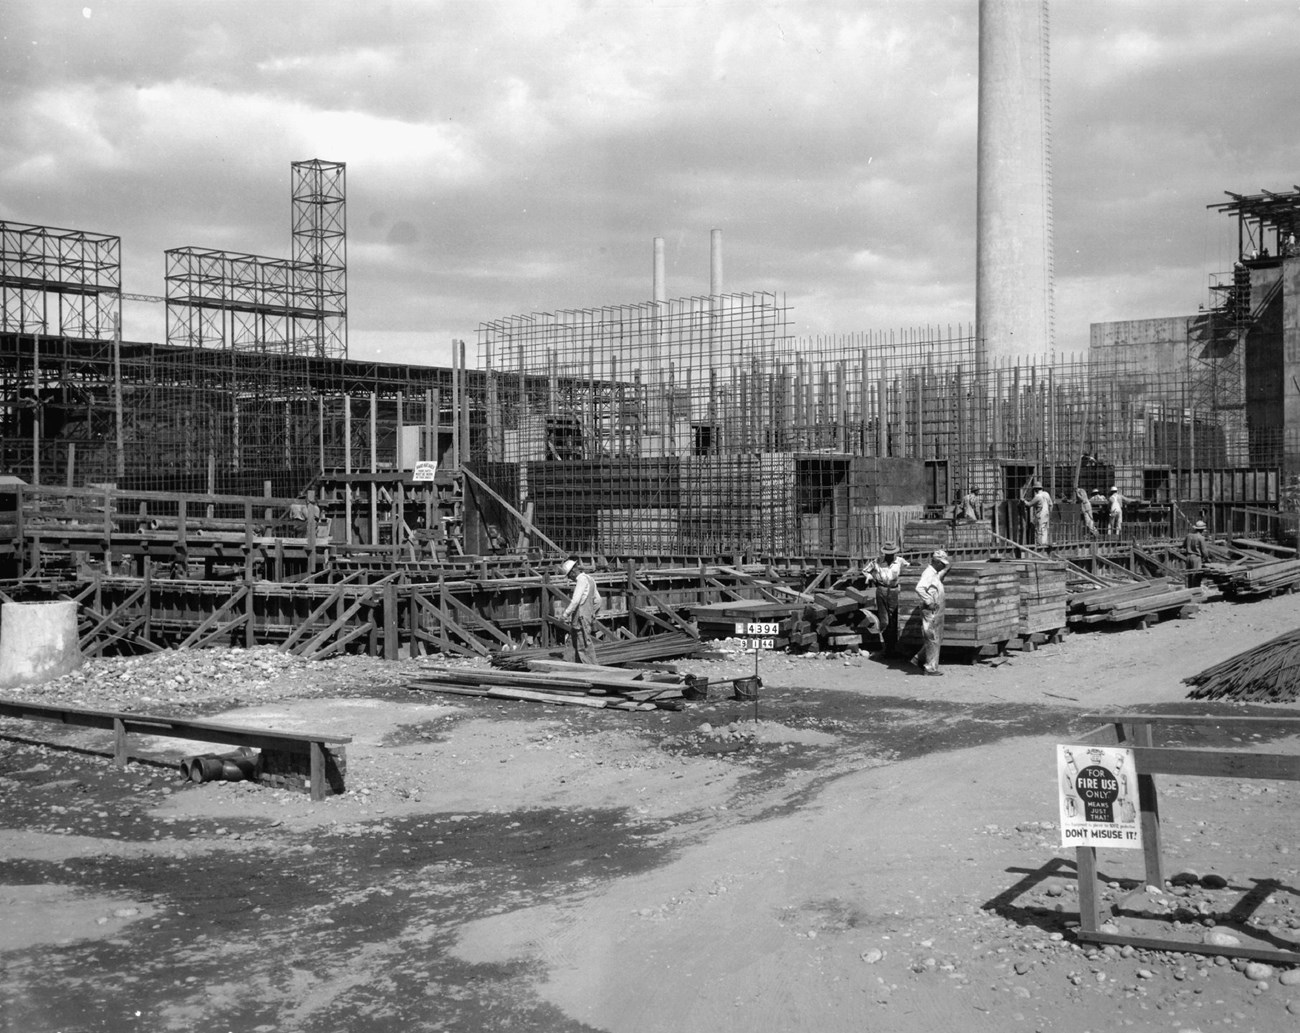 Construction at Hanford during the Manhattan Project